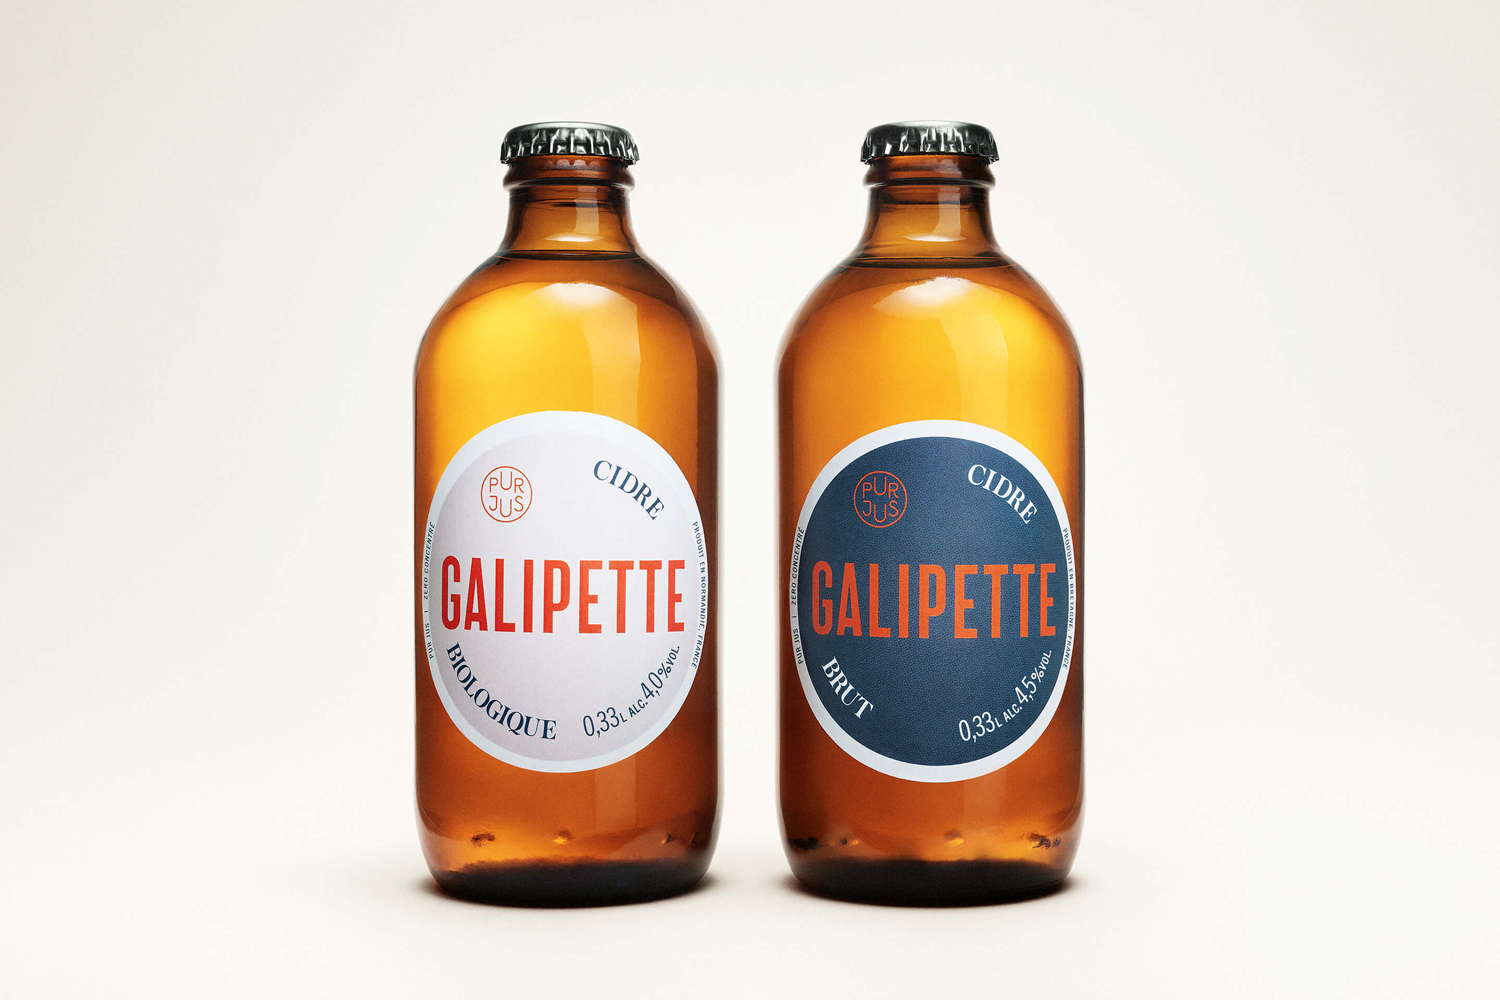 Galipette Cidre Appoints ex-Diageo Executive As Managing Director